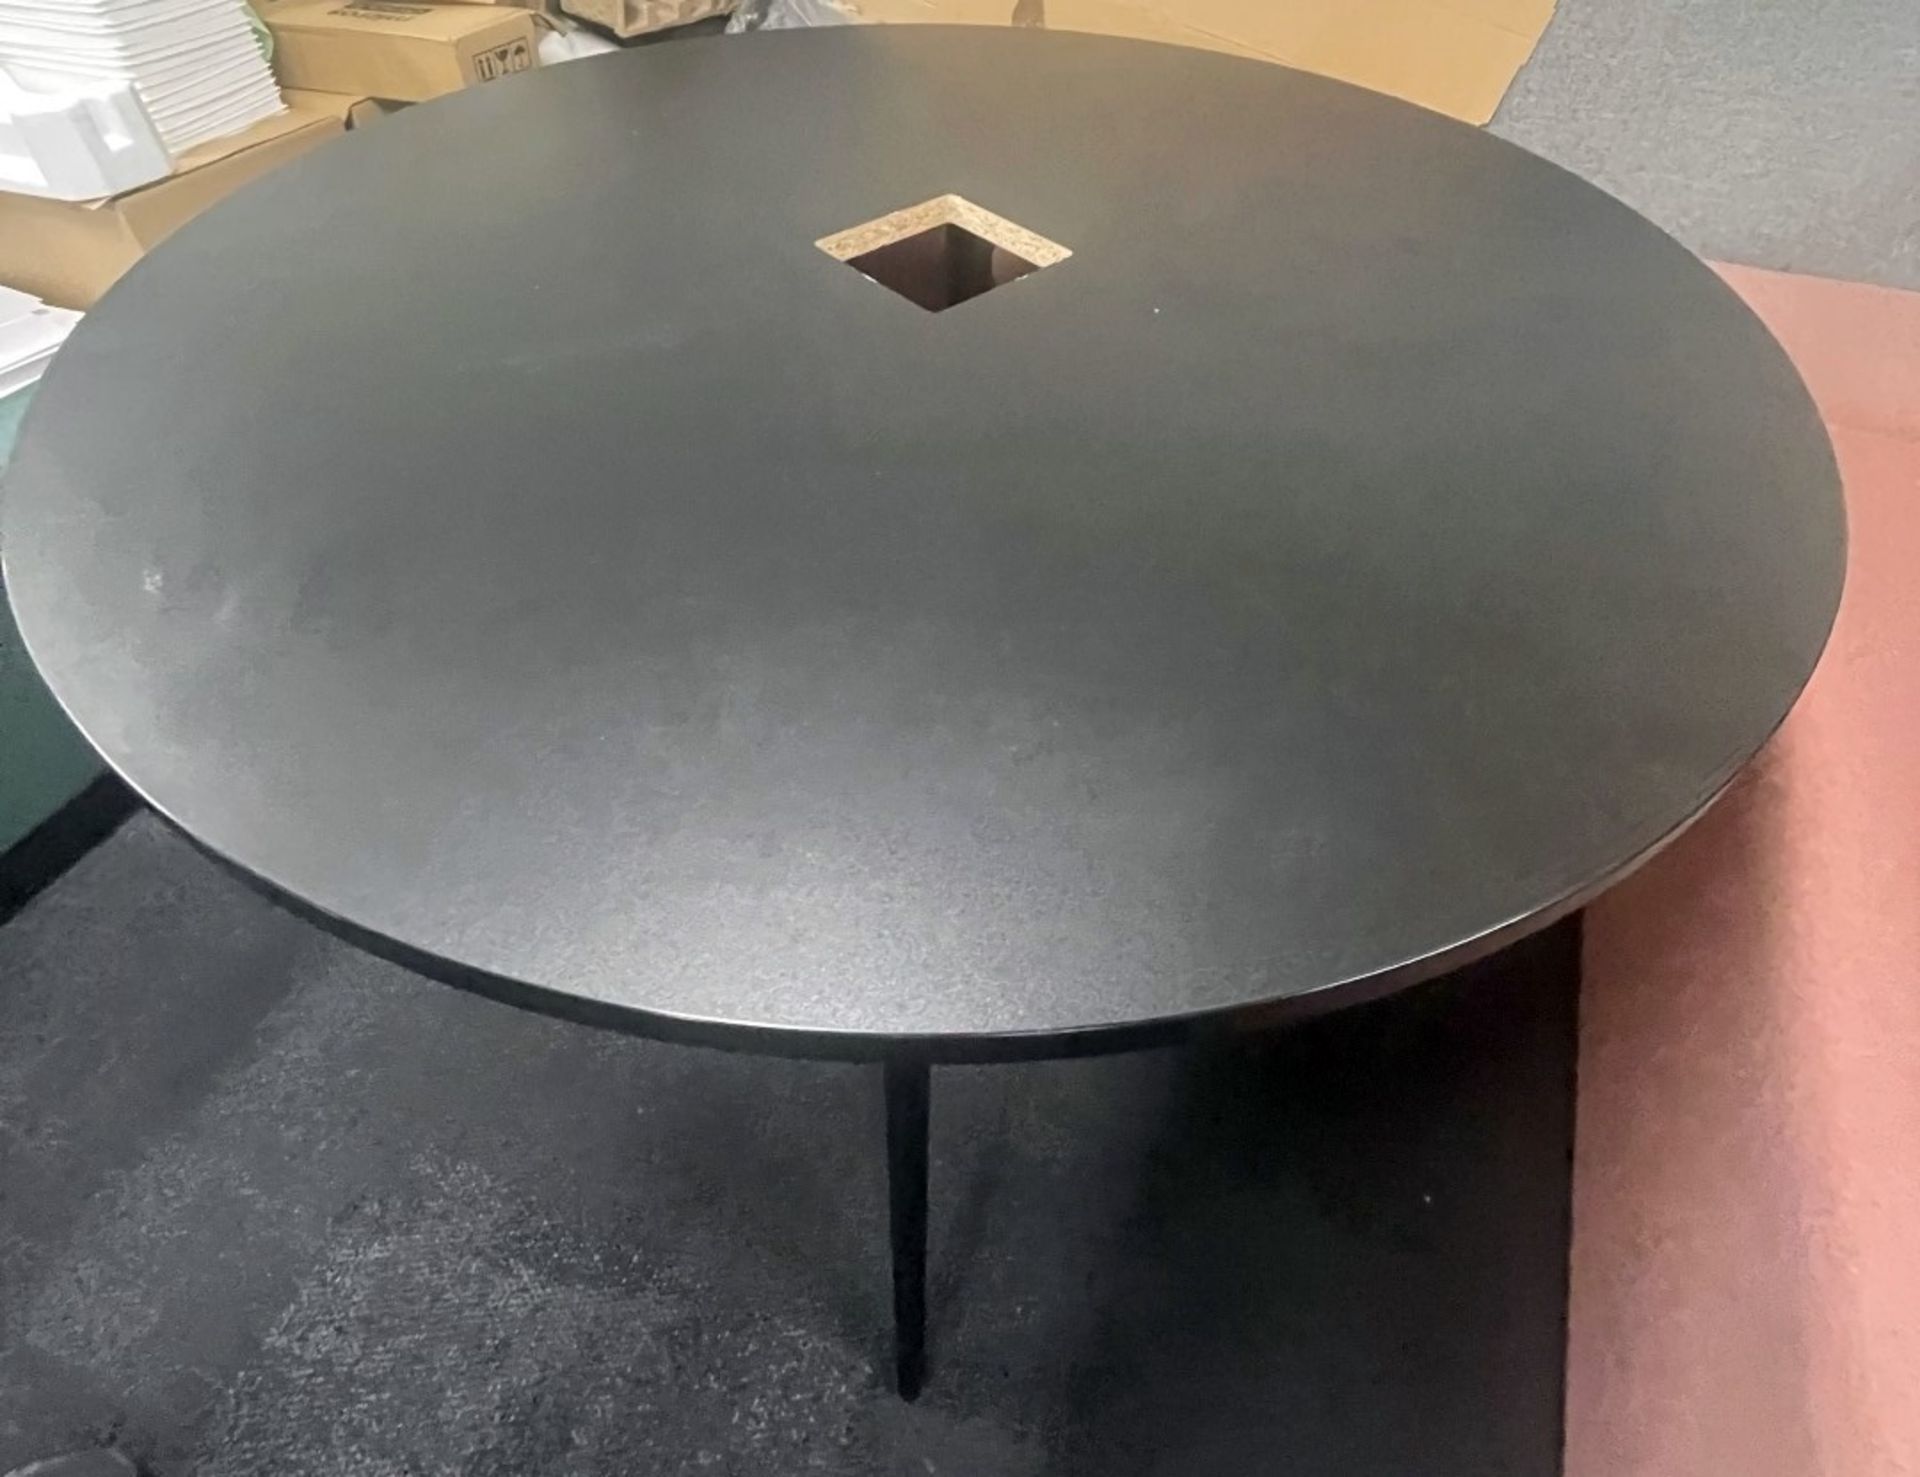 1 x Round 1.2-Metre Black Table With Centre Opening - To Be Removed From An Executive Office - Image 4 of 7